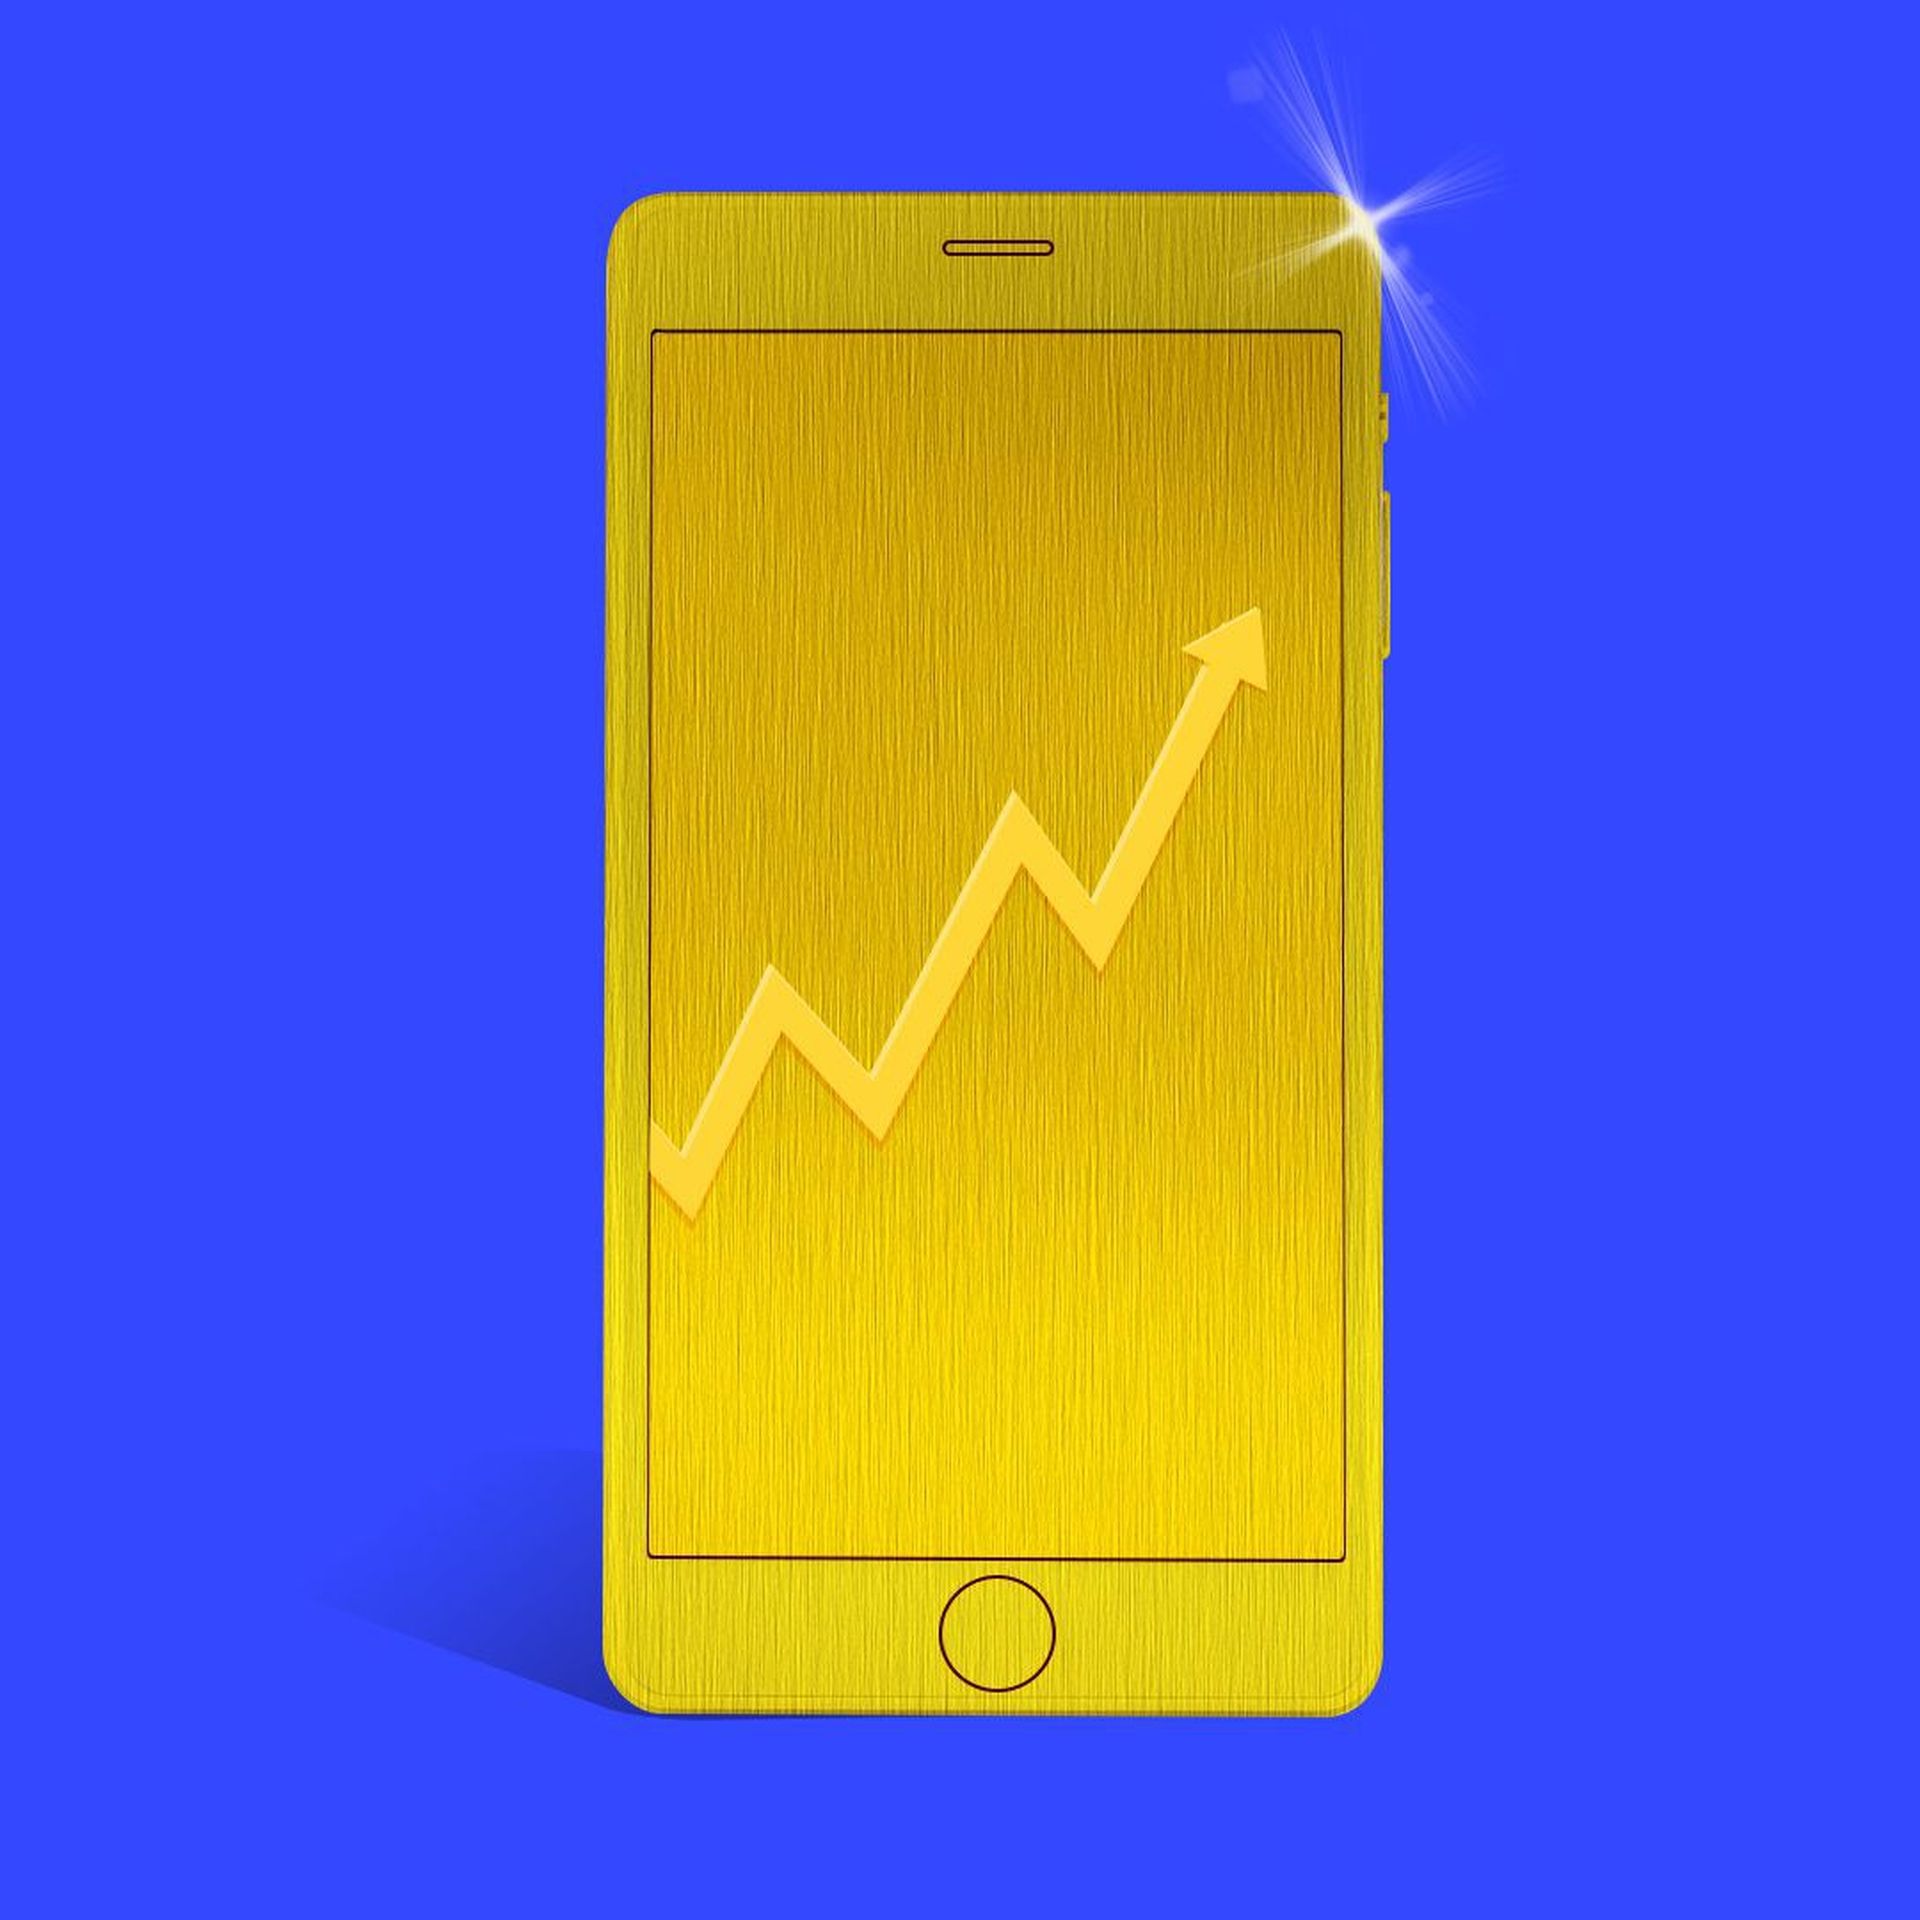 blue background image featuring an illustration of a gold phone with an up arrow on screen 